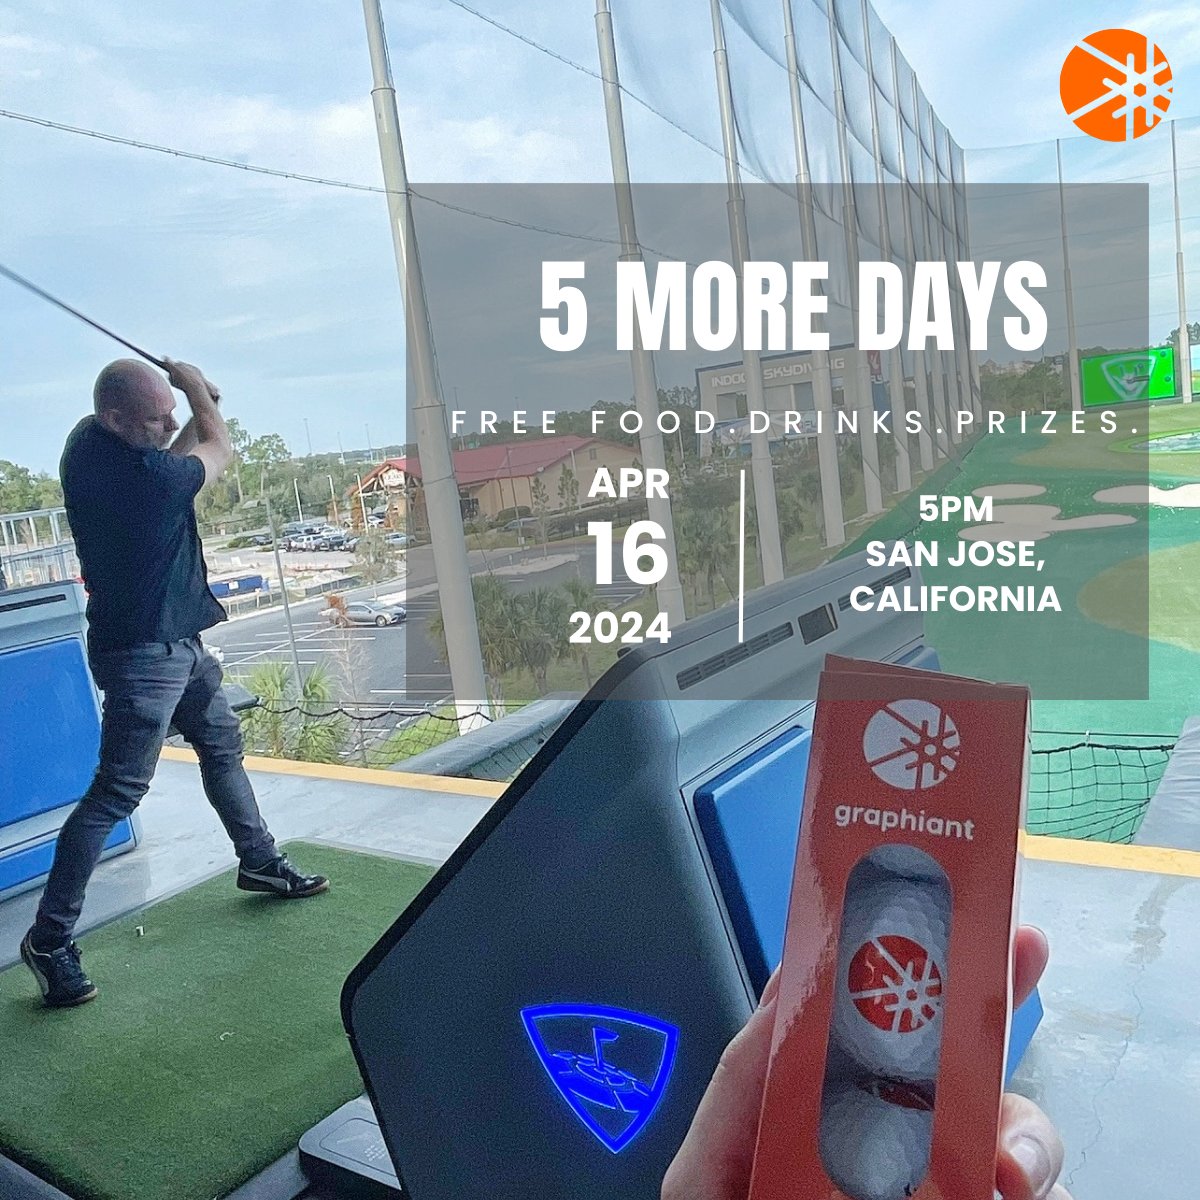 Join Graphiant for: 🍻 Drinks 🍕 Apps 🛍 Swag ⛳️ Networking 👉 Tuesday, April 16 from 5-7pm 📍10 Topgolf Dr, San Jose, CA 95002 Interested? Register here: hubs.ly/Q02sBwF30